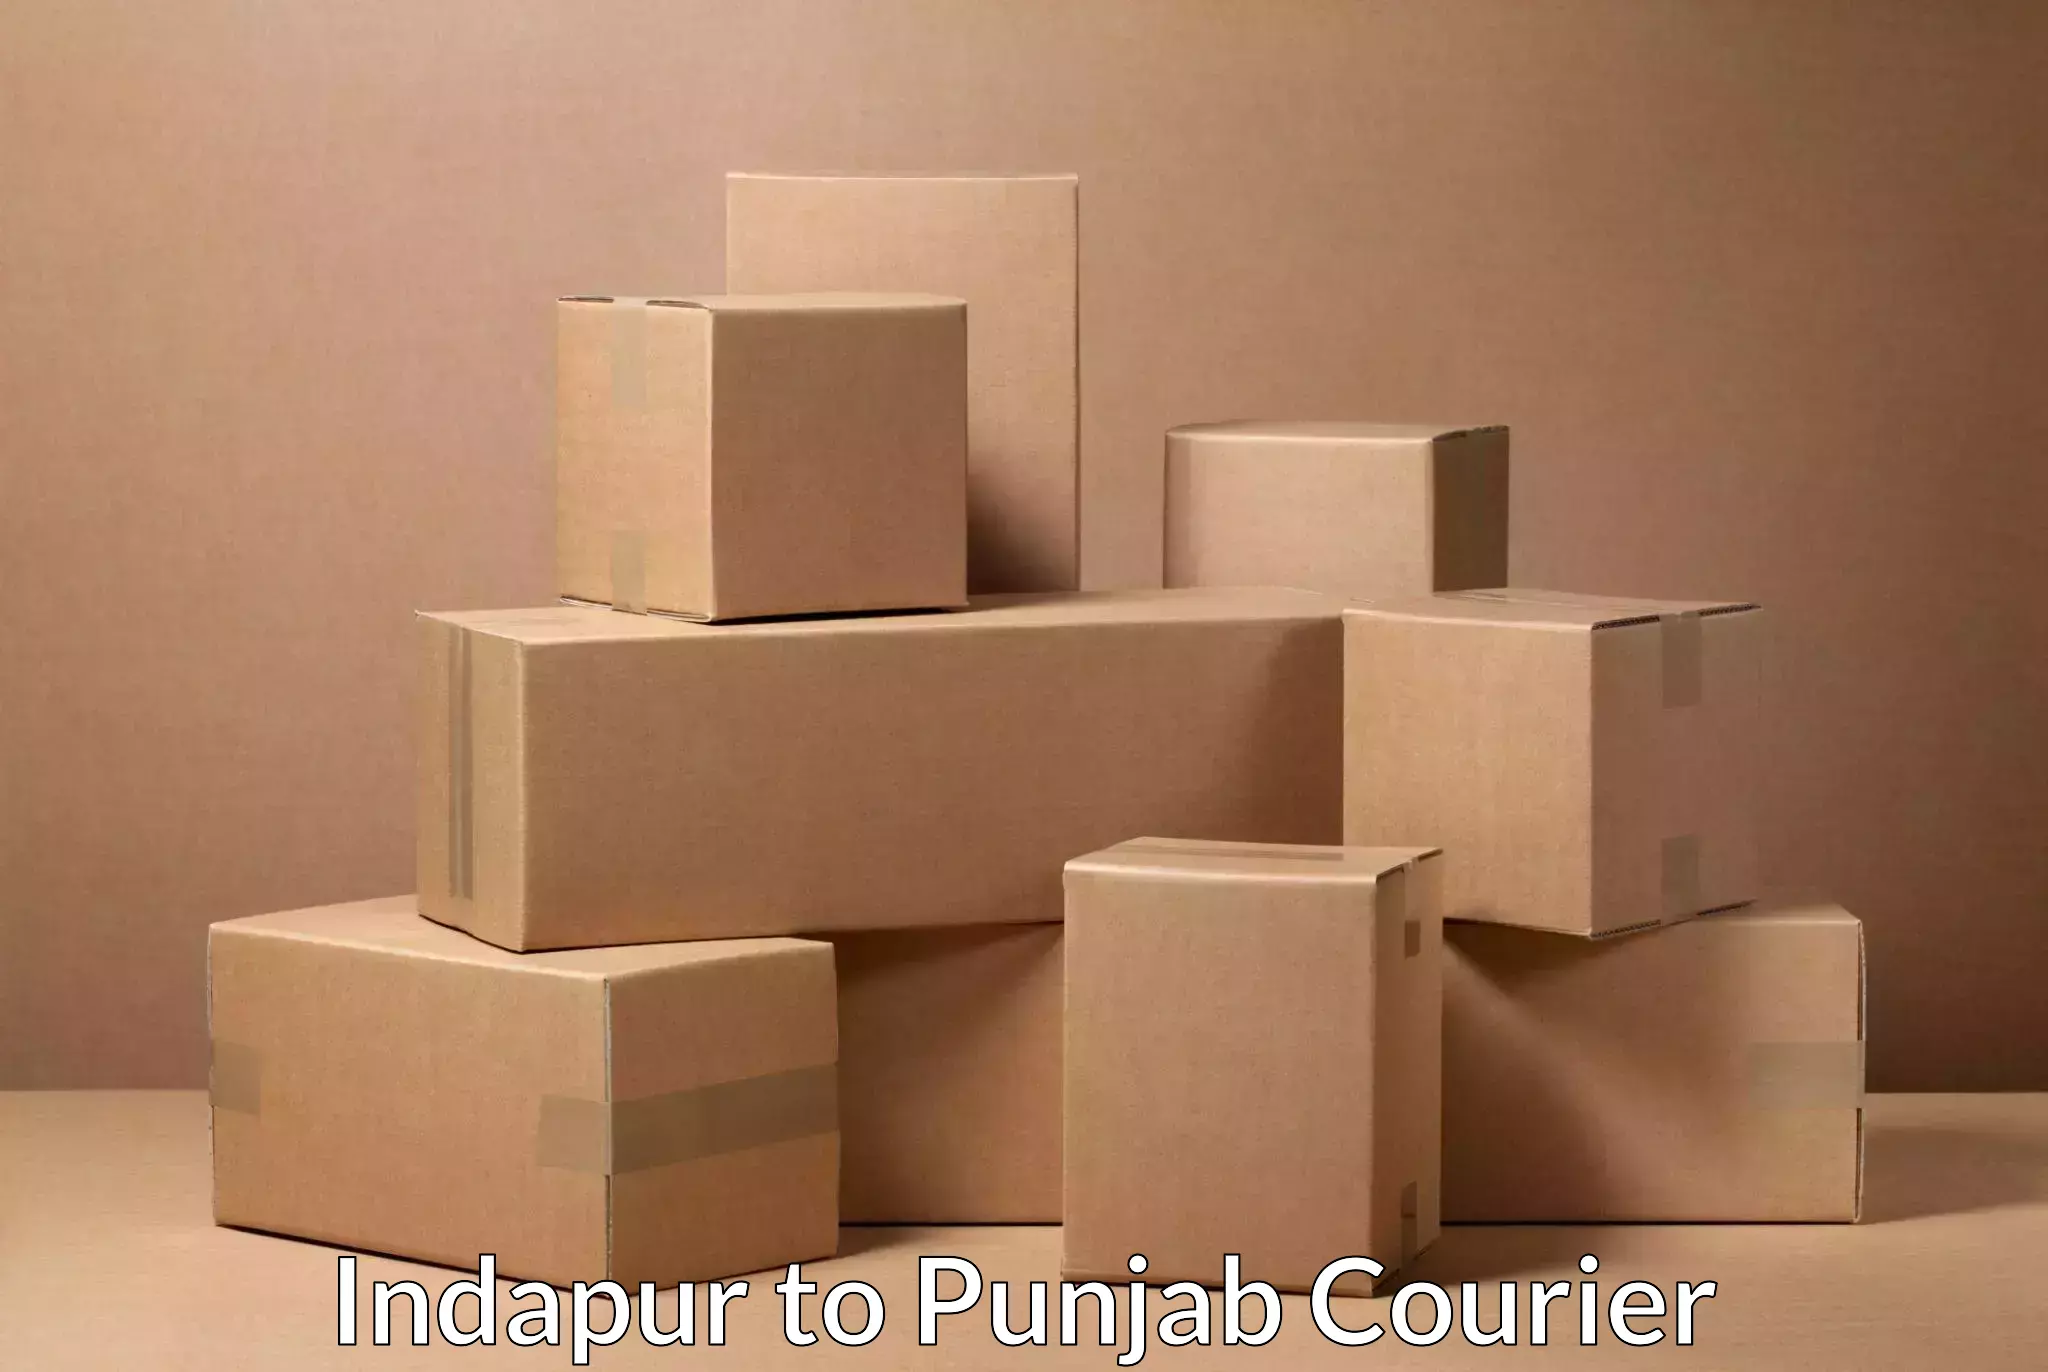 Sustainable courier practices Indapur to Ludhiana